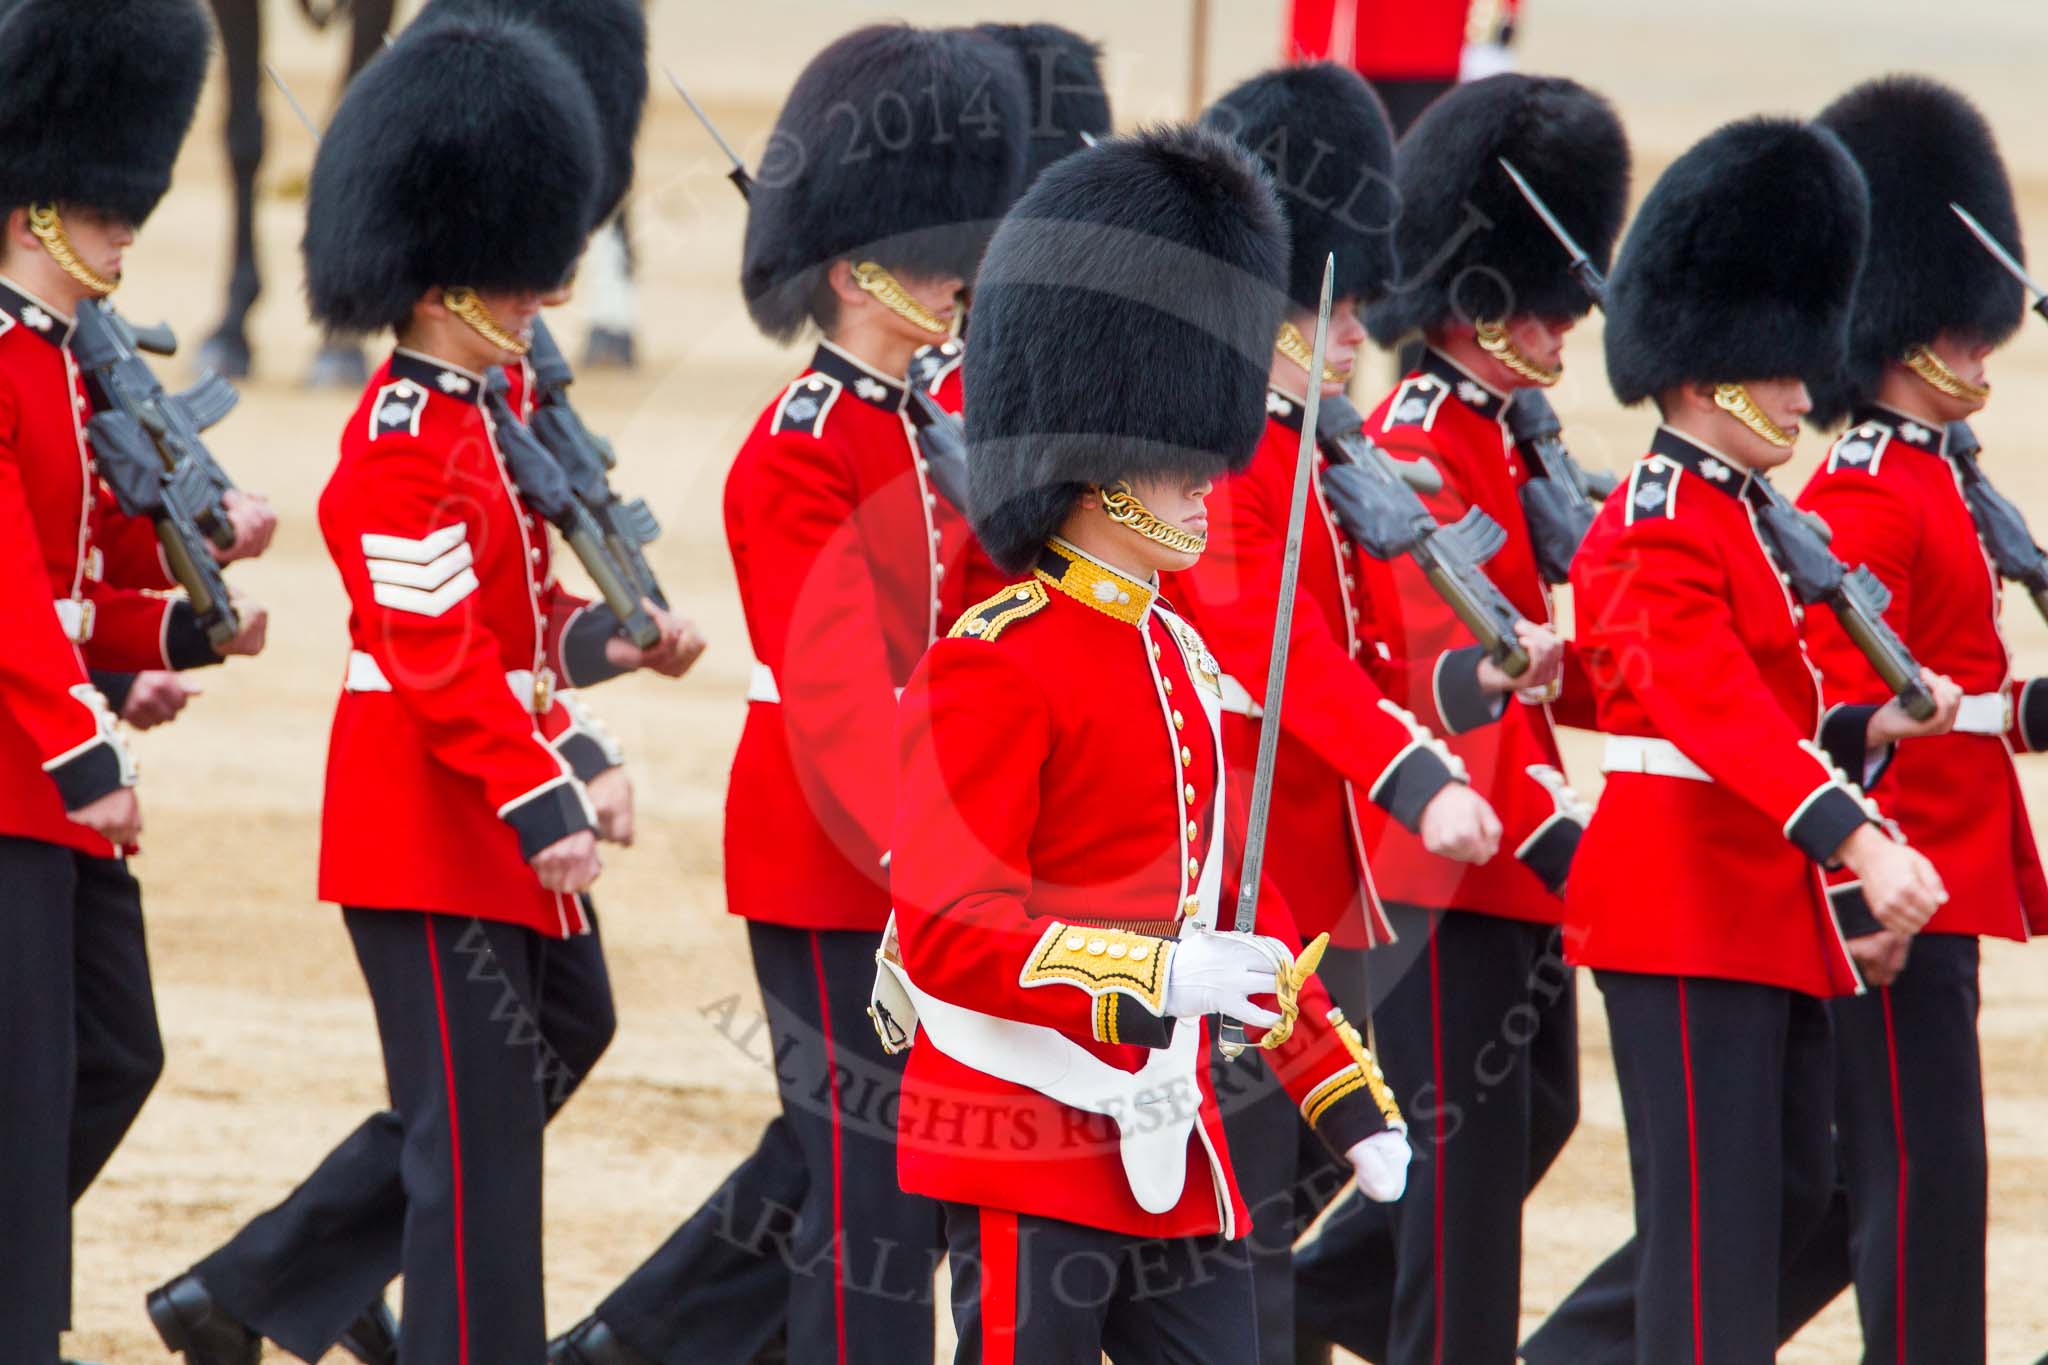 Trooping the Colour 2014.
Horse Guards Parade, Westminster,
London SW1A,

United Kingdom,
on 14 June 2014 at 11:18, image #506